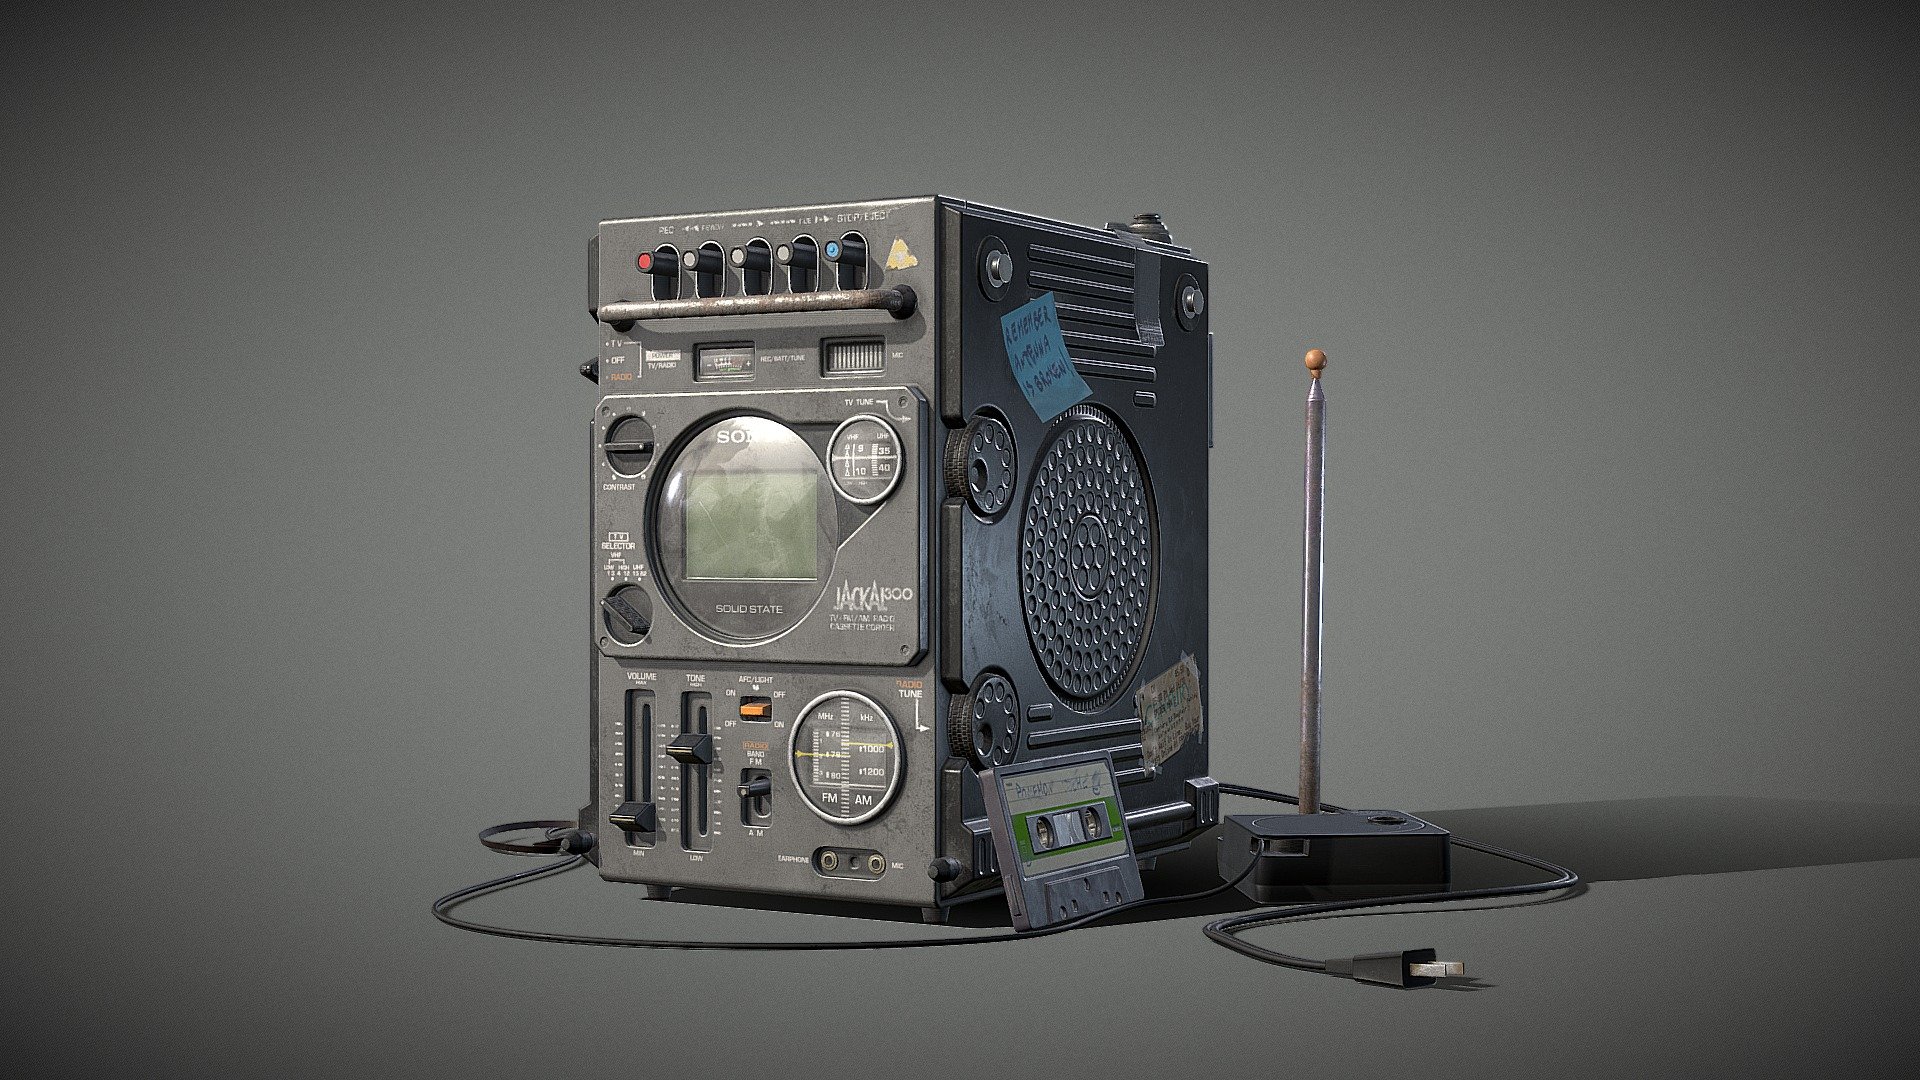 Made for my final GAP exam at Howest Dae, we had to model a prop that could be found in a mercenary hideout. I decided to model a Sony FX-300 Jackal, a multi-functional portable tv made in 1978. It was an equally fun and challenging project, in my mind it has been in the mercenary's possession for a while and he recently decided to pick it up again and reminish about past memories 3d model